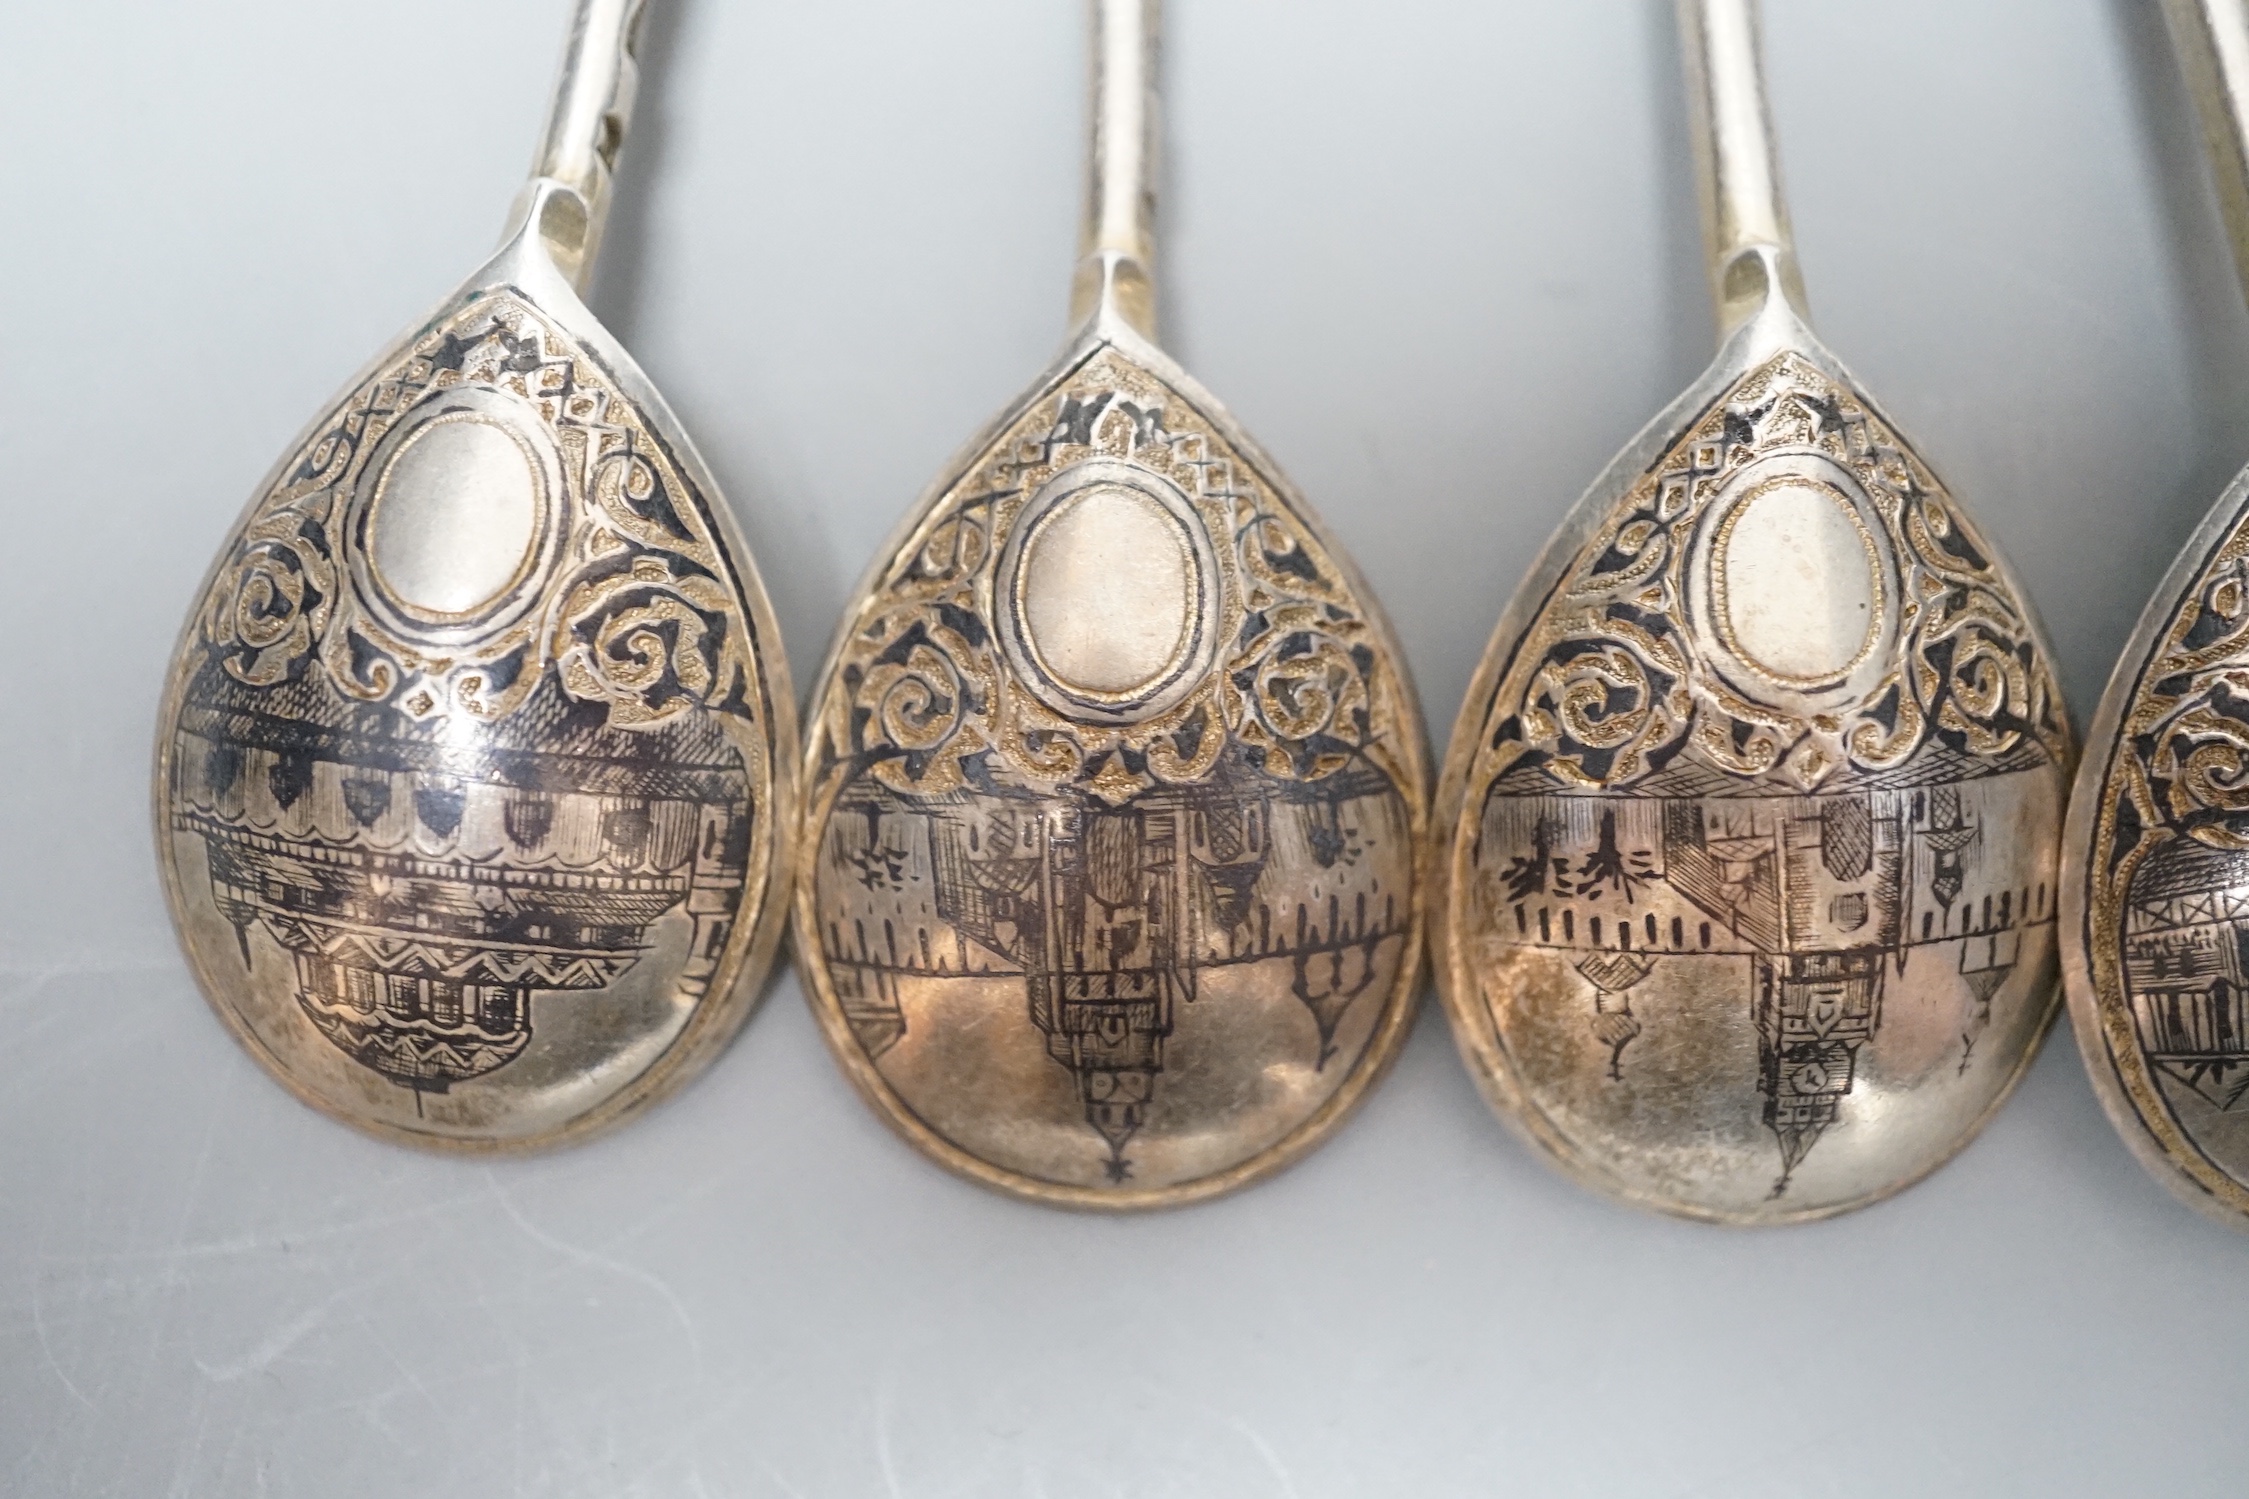 A set of five late 19th century Russian 84 zolotnik and niello spoons, 1875, 12.7cm, gross 135 grams.